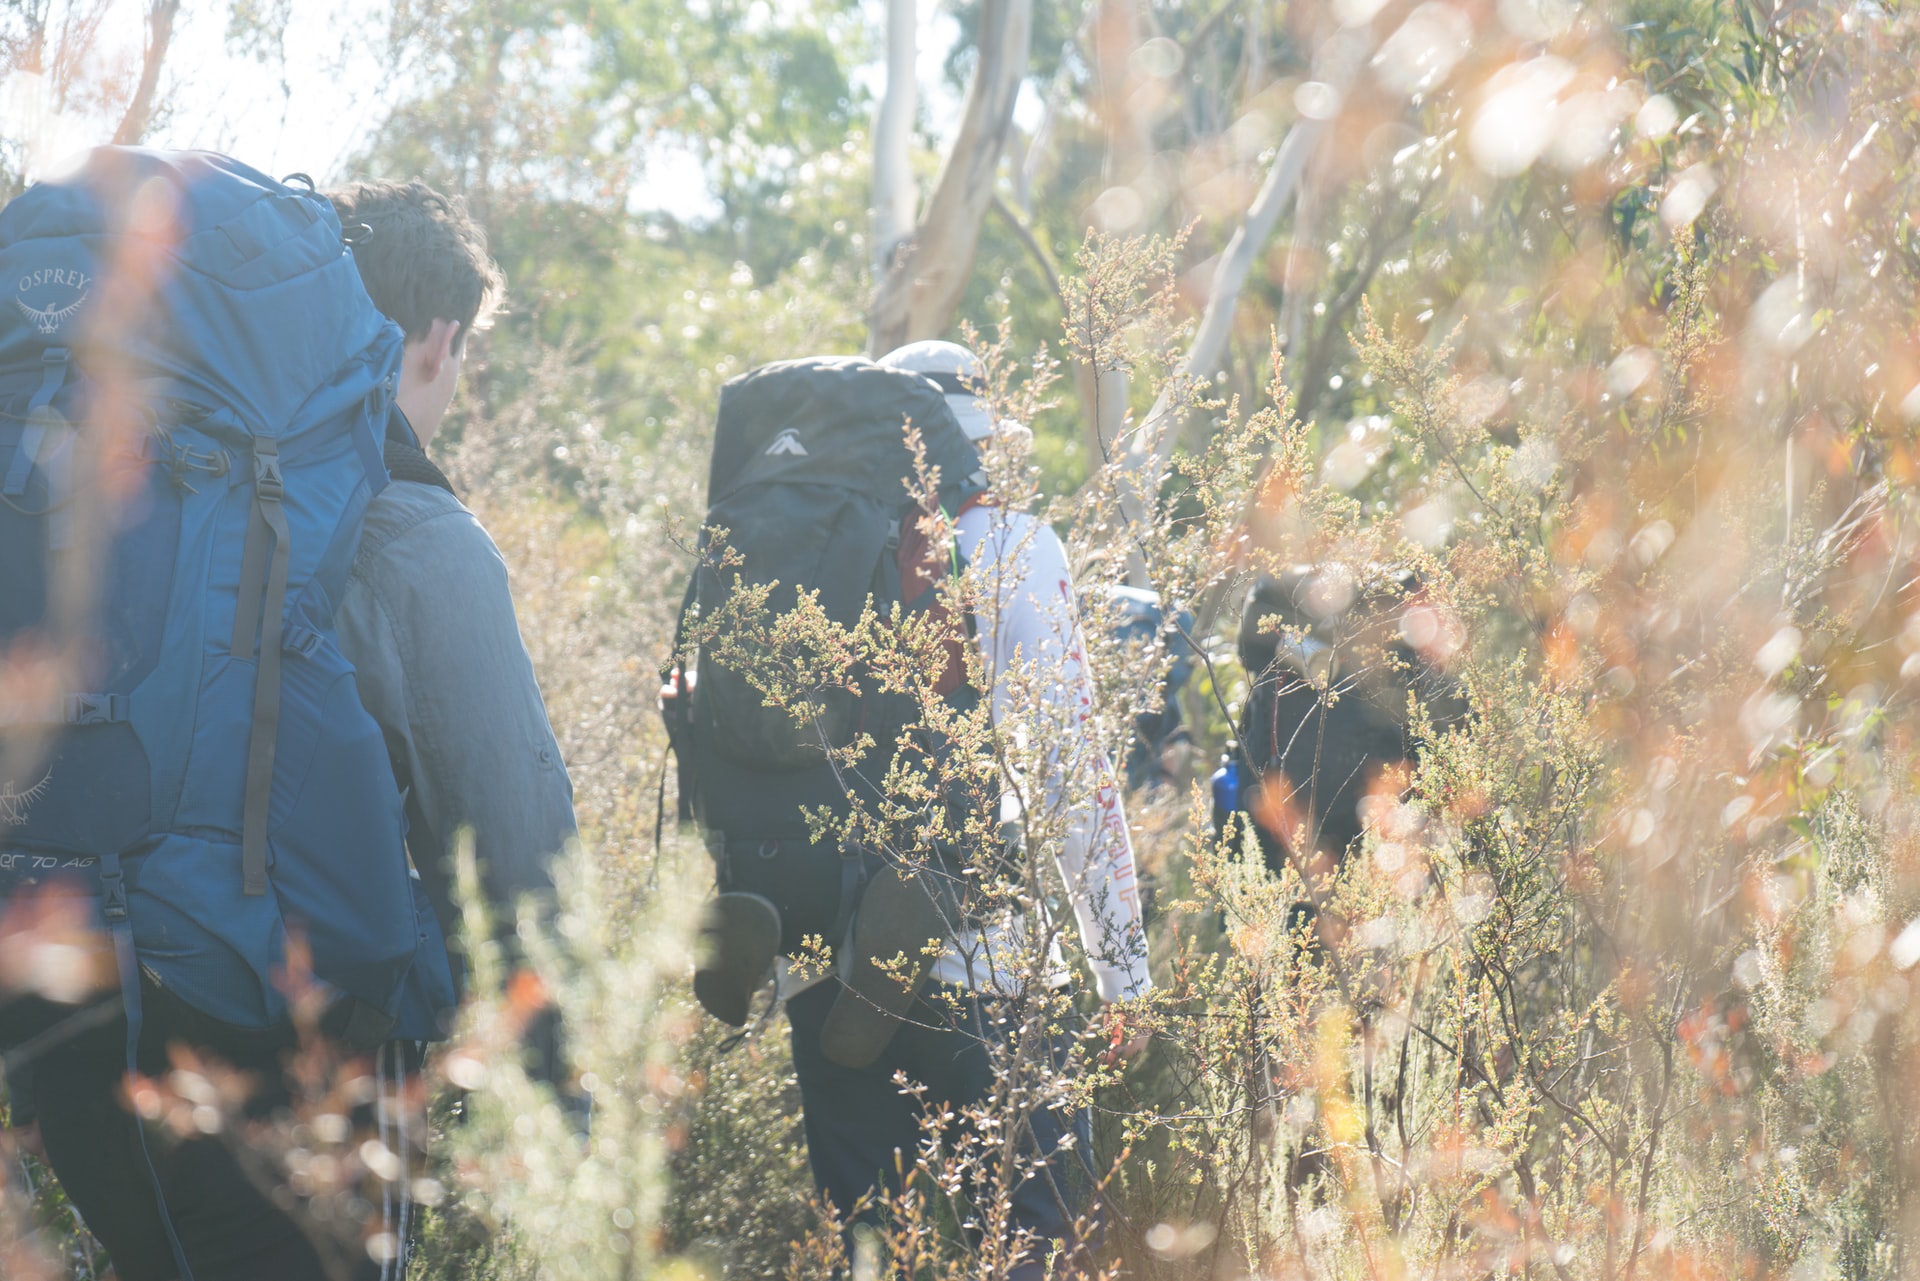 7 ways to have the best staycation ever - get into nature - 3 people hiking through the bush with overnight packs on